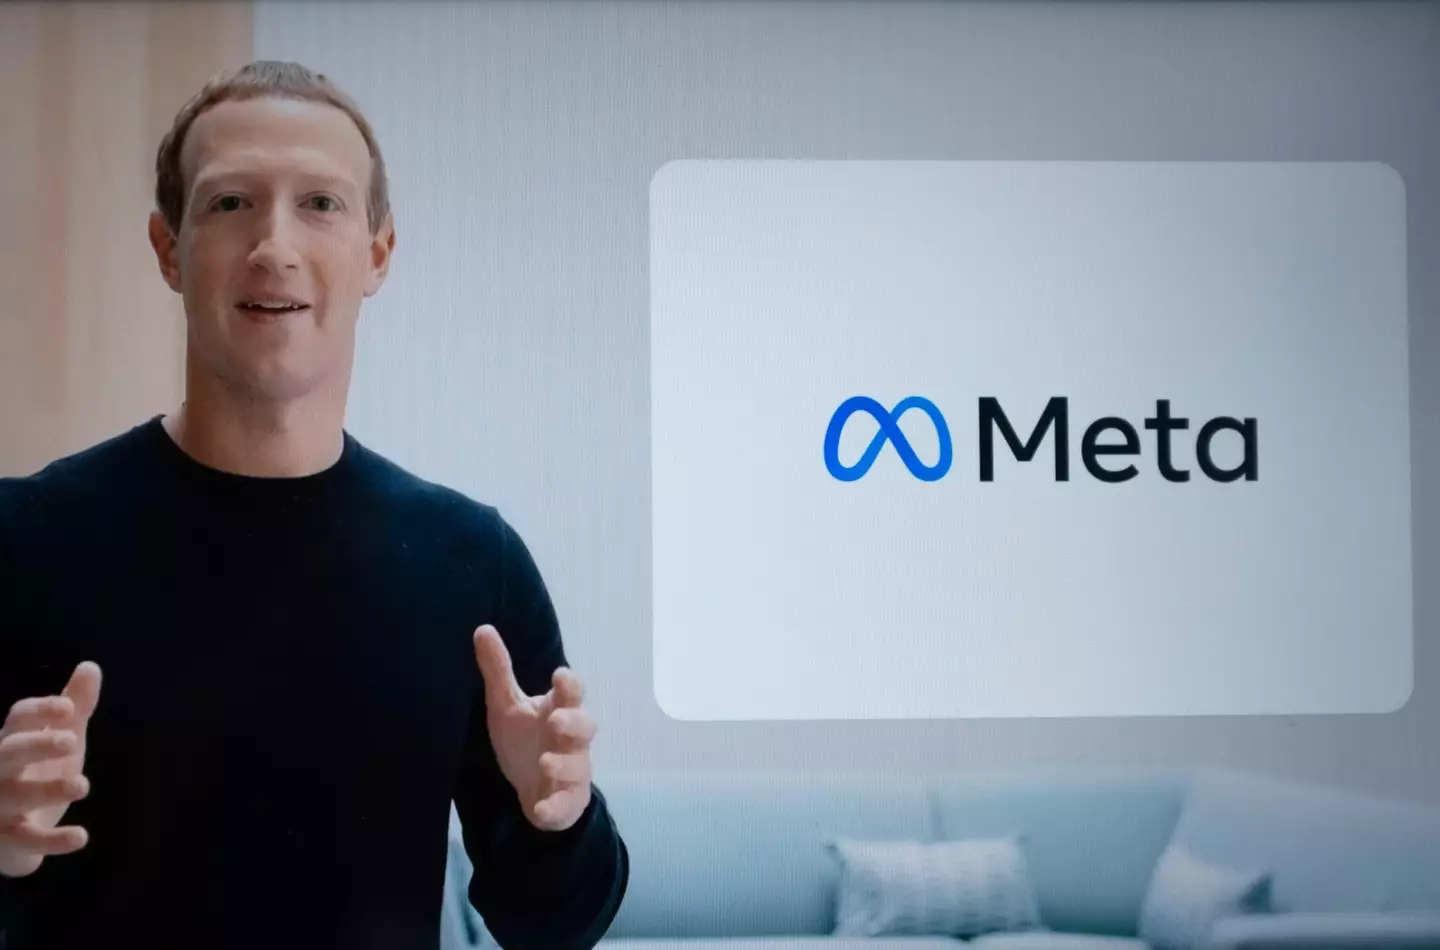 Mark Zuckerberg is the CEO of Meta and Facebook.